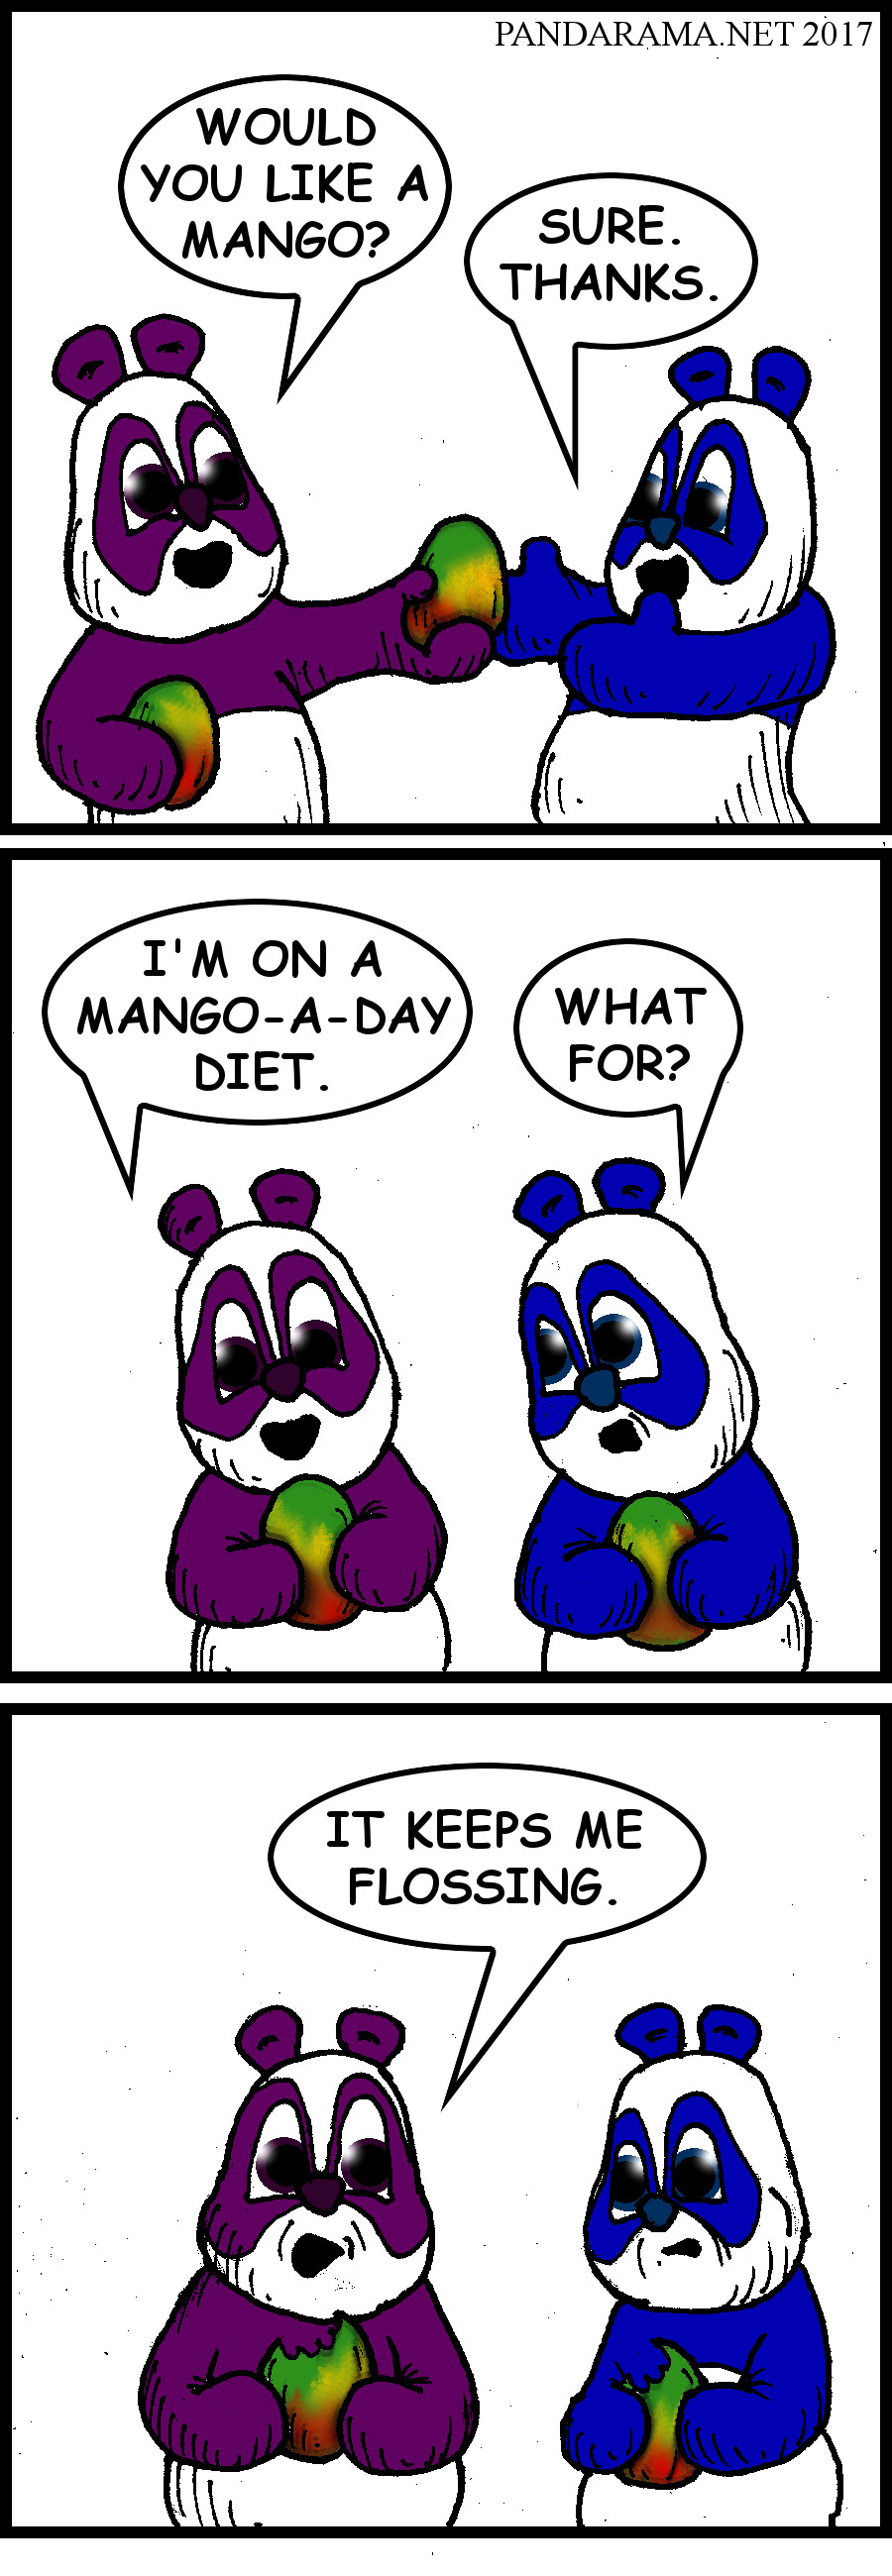 panda on mango-a-day diet, because it necessitates flossing. flossing comic. how to floss. panda bear comic strip